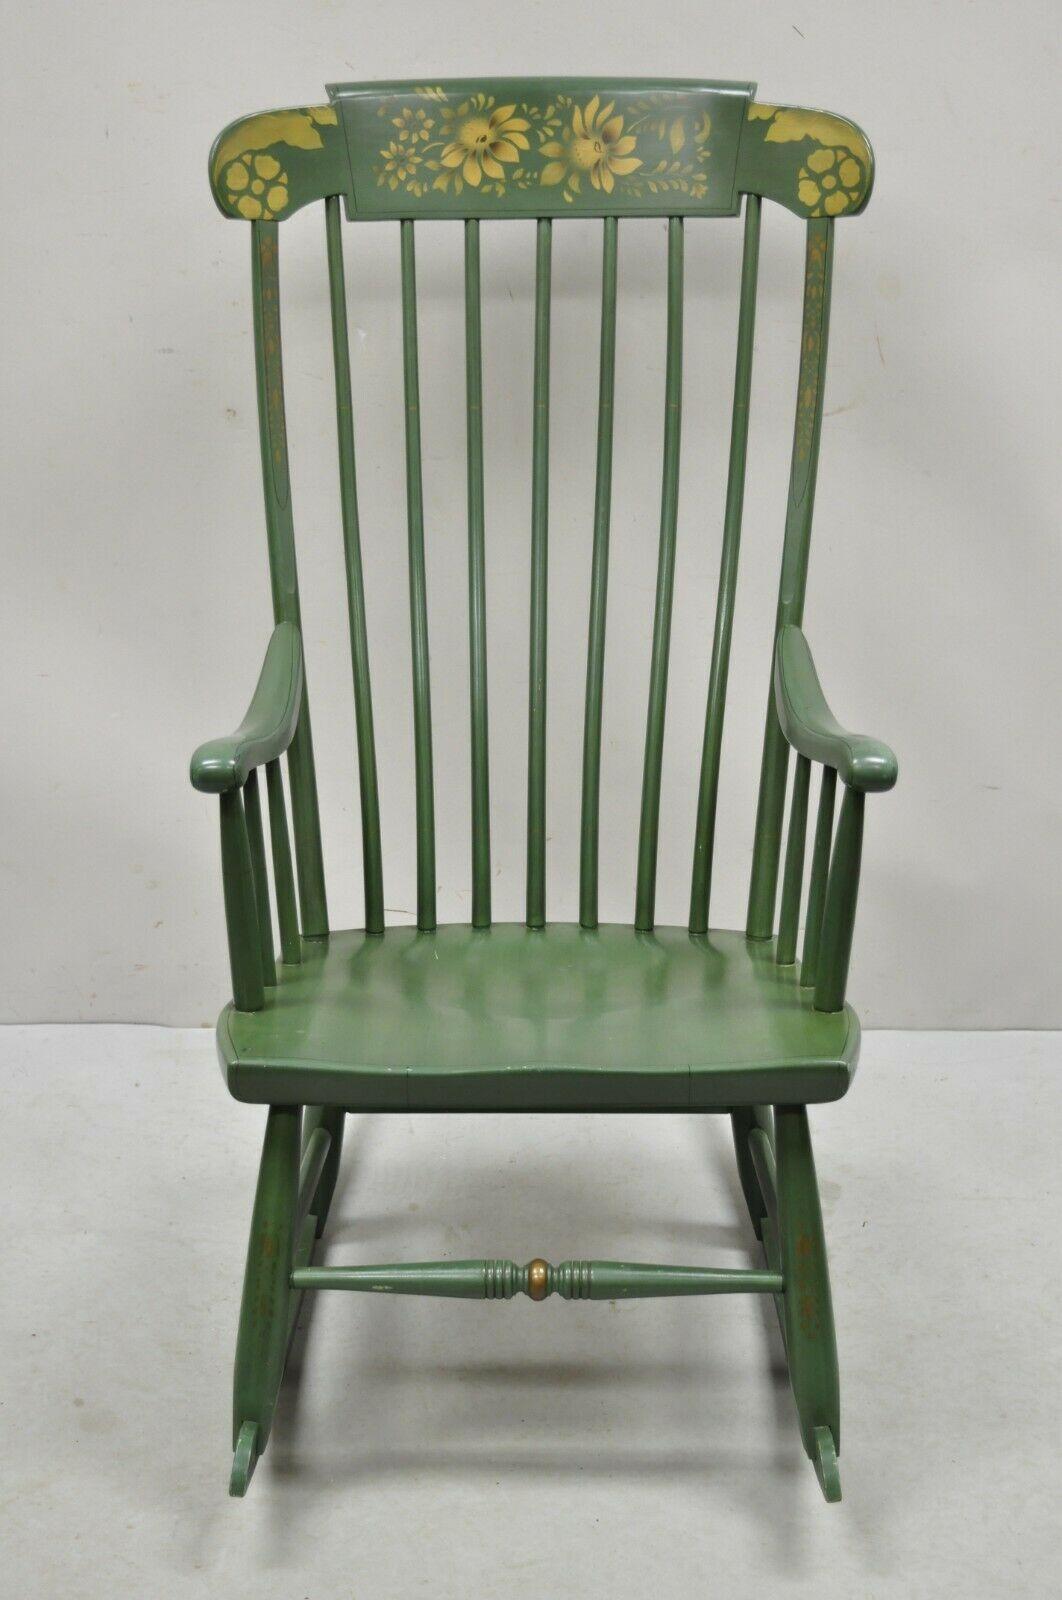 Heywood Wakefield green hitchcock style stencil decorated rocker rocking chair. Item features original green painted finish, stencil paint decorated top rail, original stamps, quality American craftsmanship, great style and form. Circa mid-20th